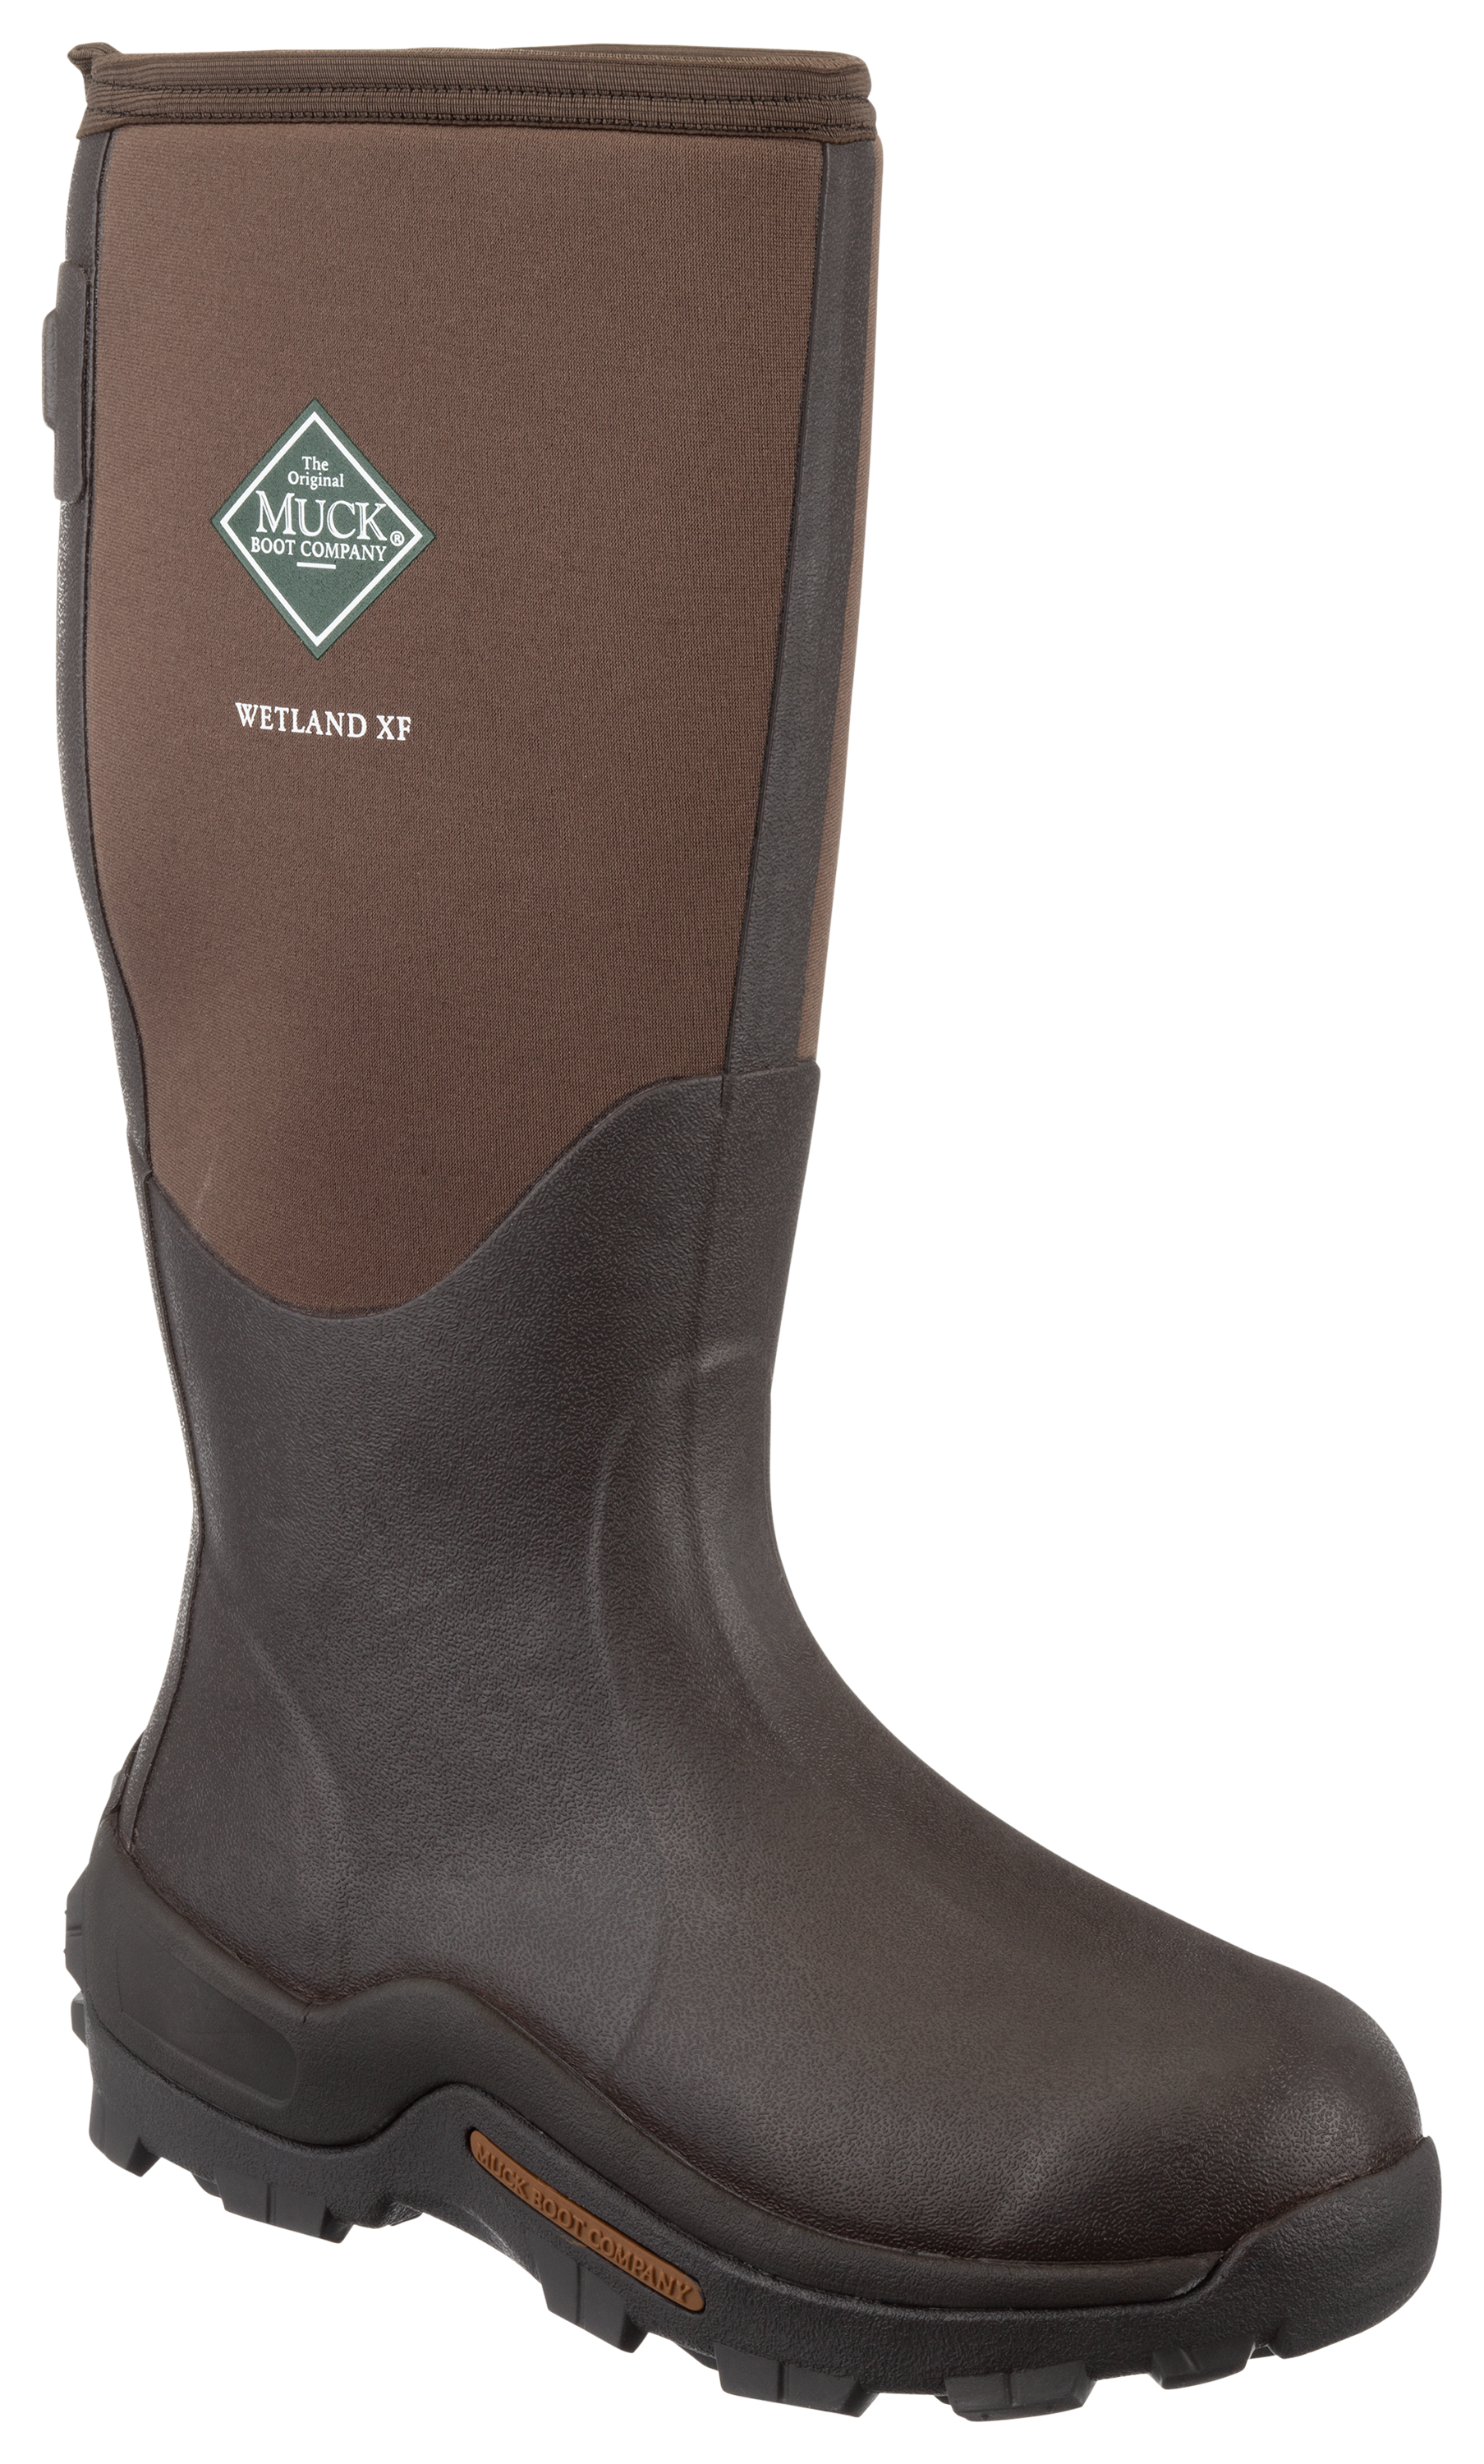 The Original Muck Boot Company Wetland XF Rubber Boots for Men | Bass ...